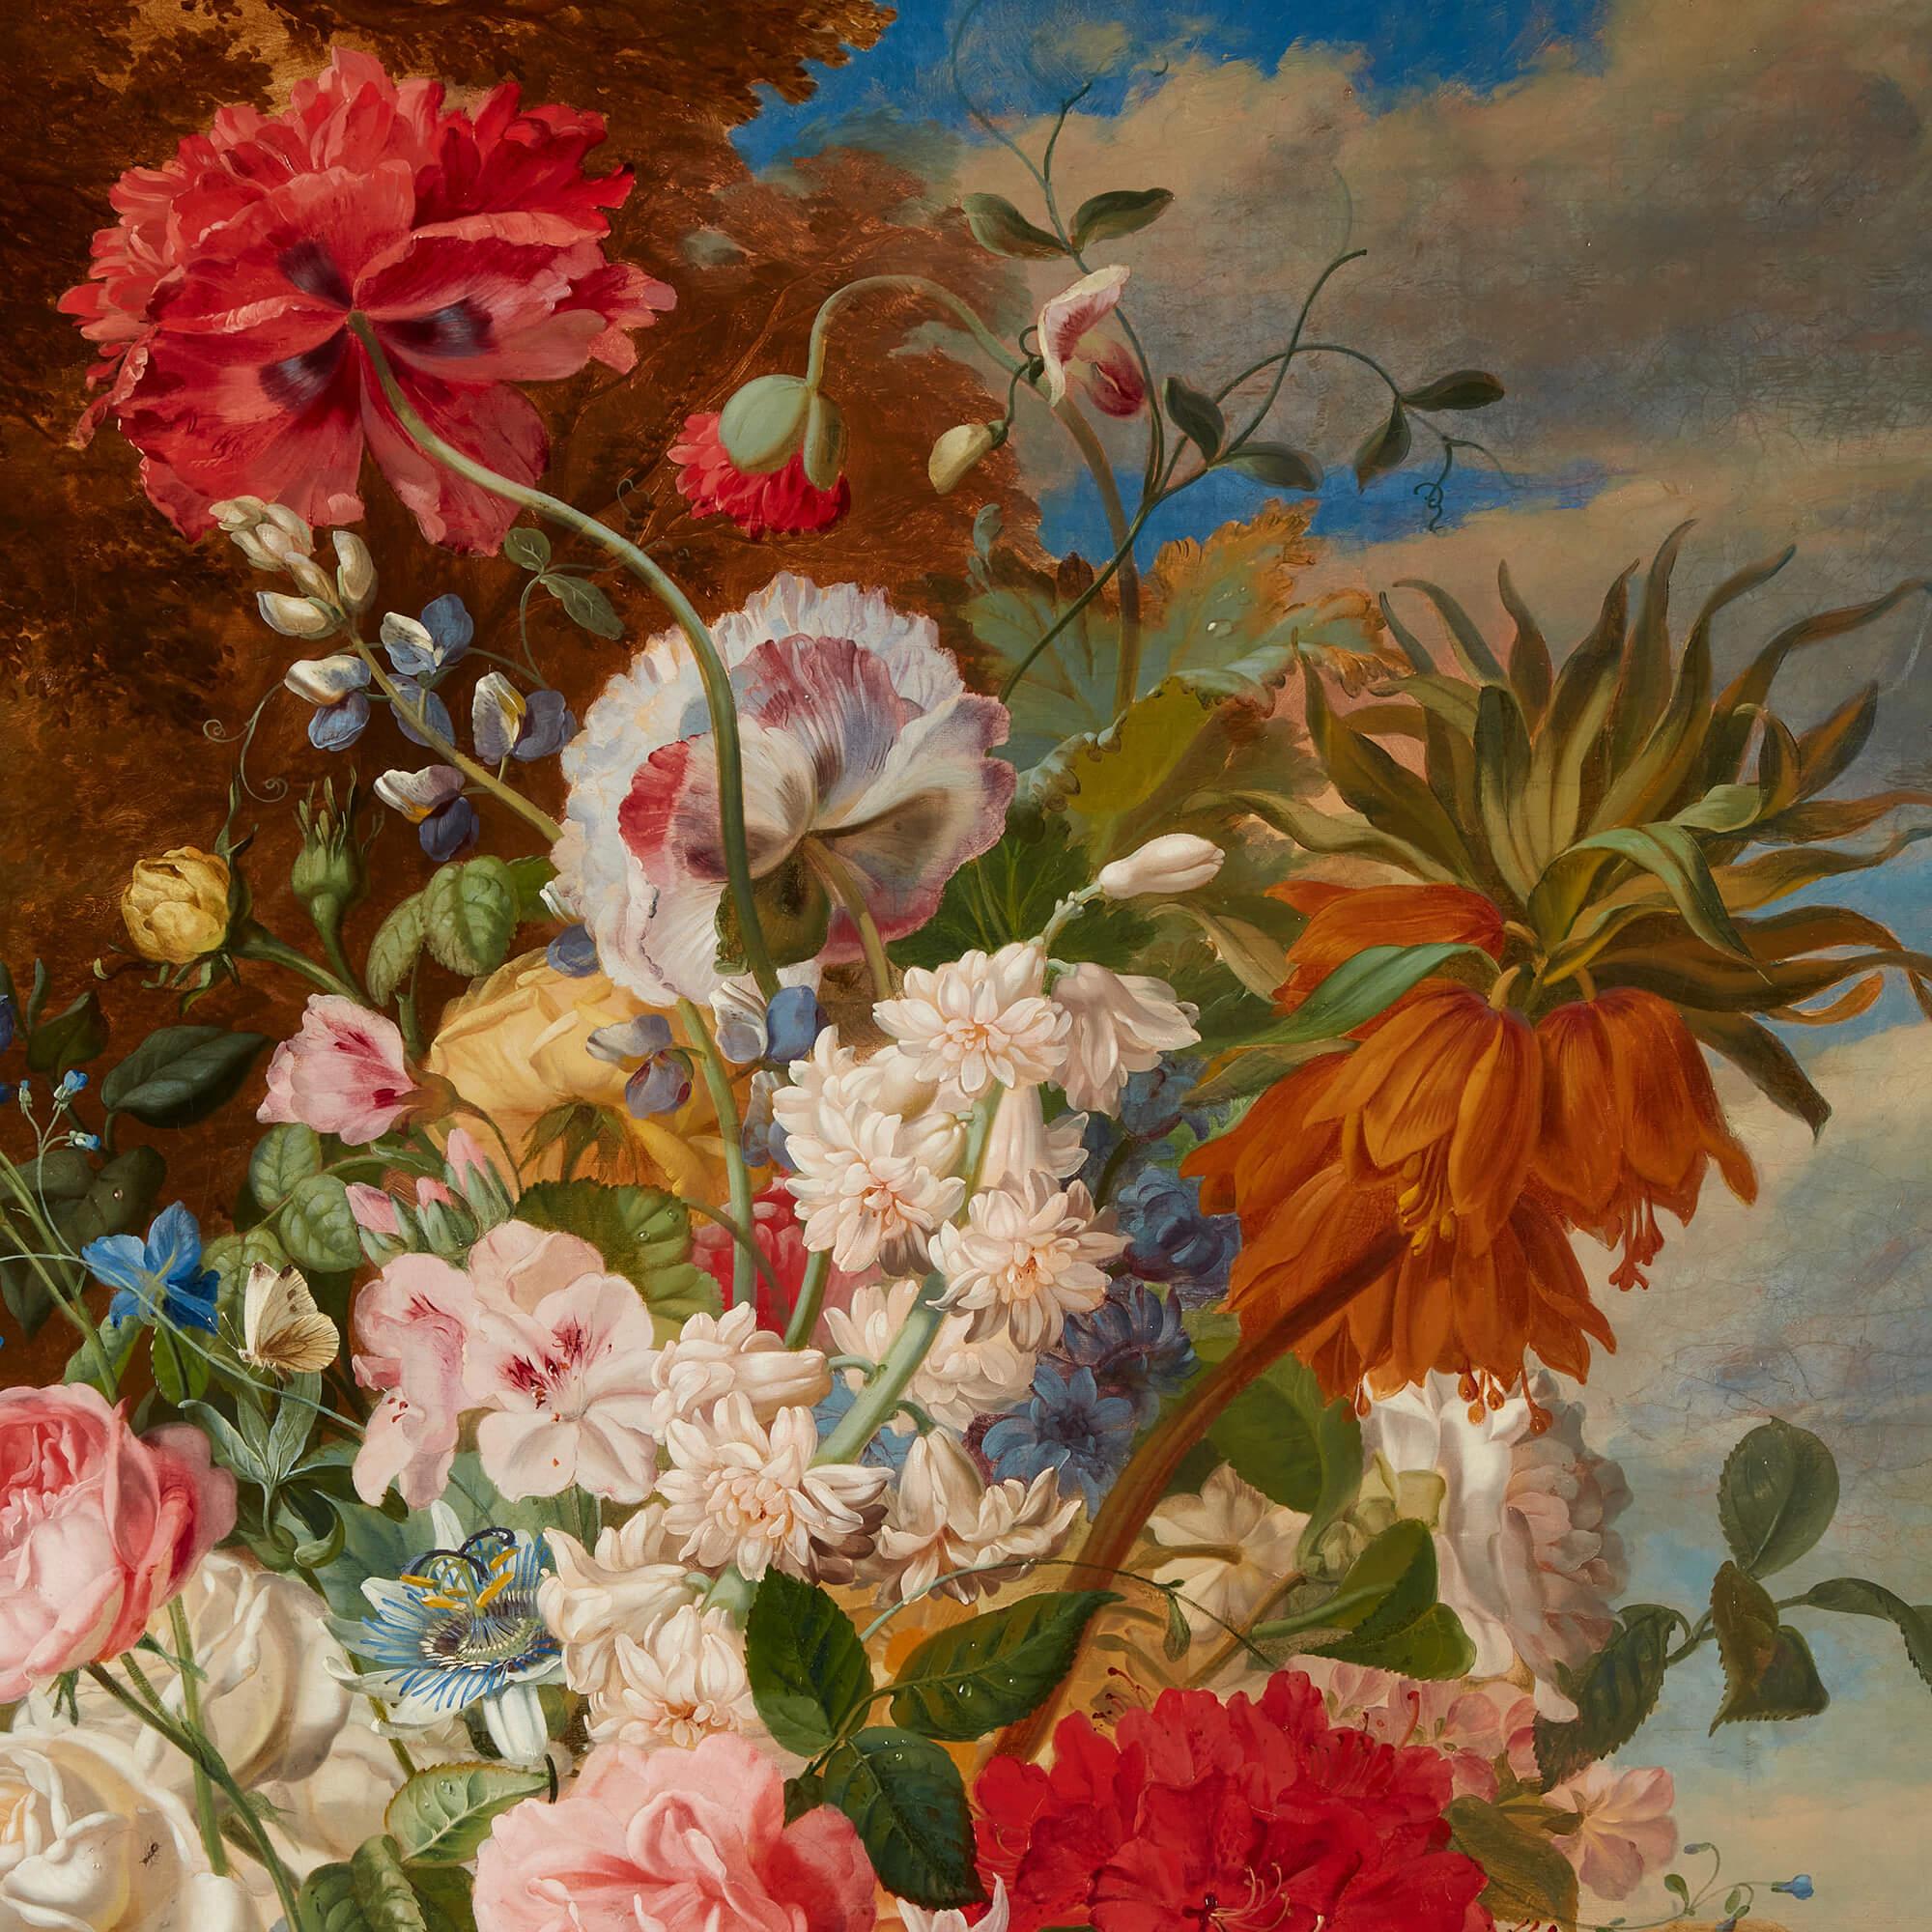 Antique still life of flowers by W. J. Wainwright 
English, Late 19th Century 
Canvas: Height 127cm, width 101cm
Frame: Height 144cm, width 120cm, depth 7cm

This beautiful still life in oils depicts an overflowing vase of flowers against a